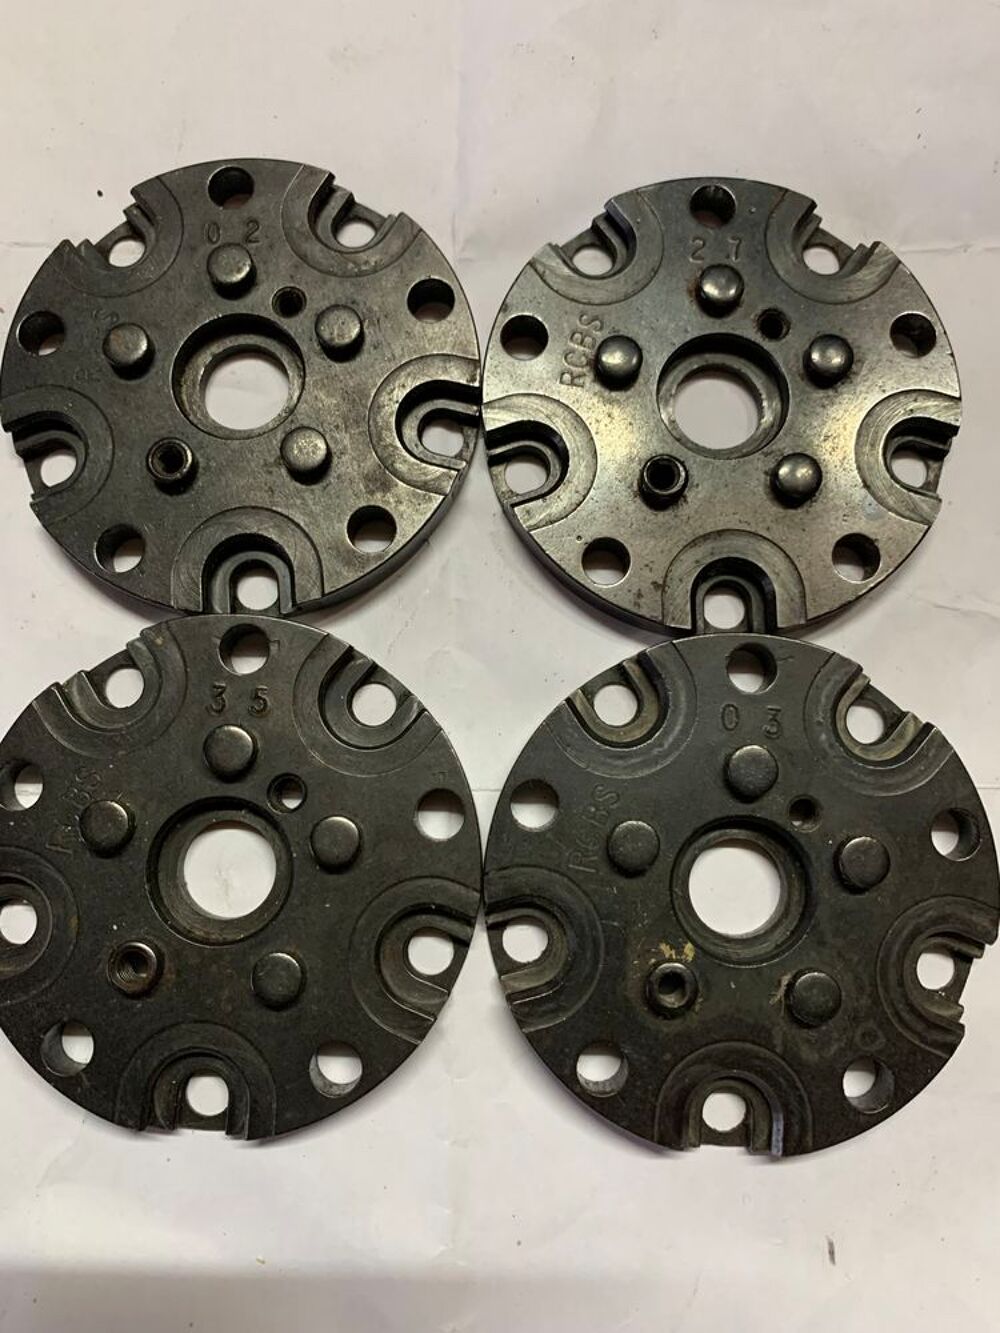 Shell plate rcbs Sports